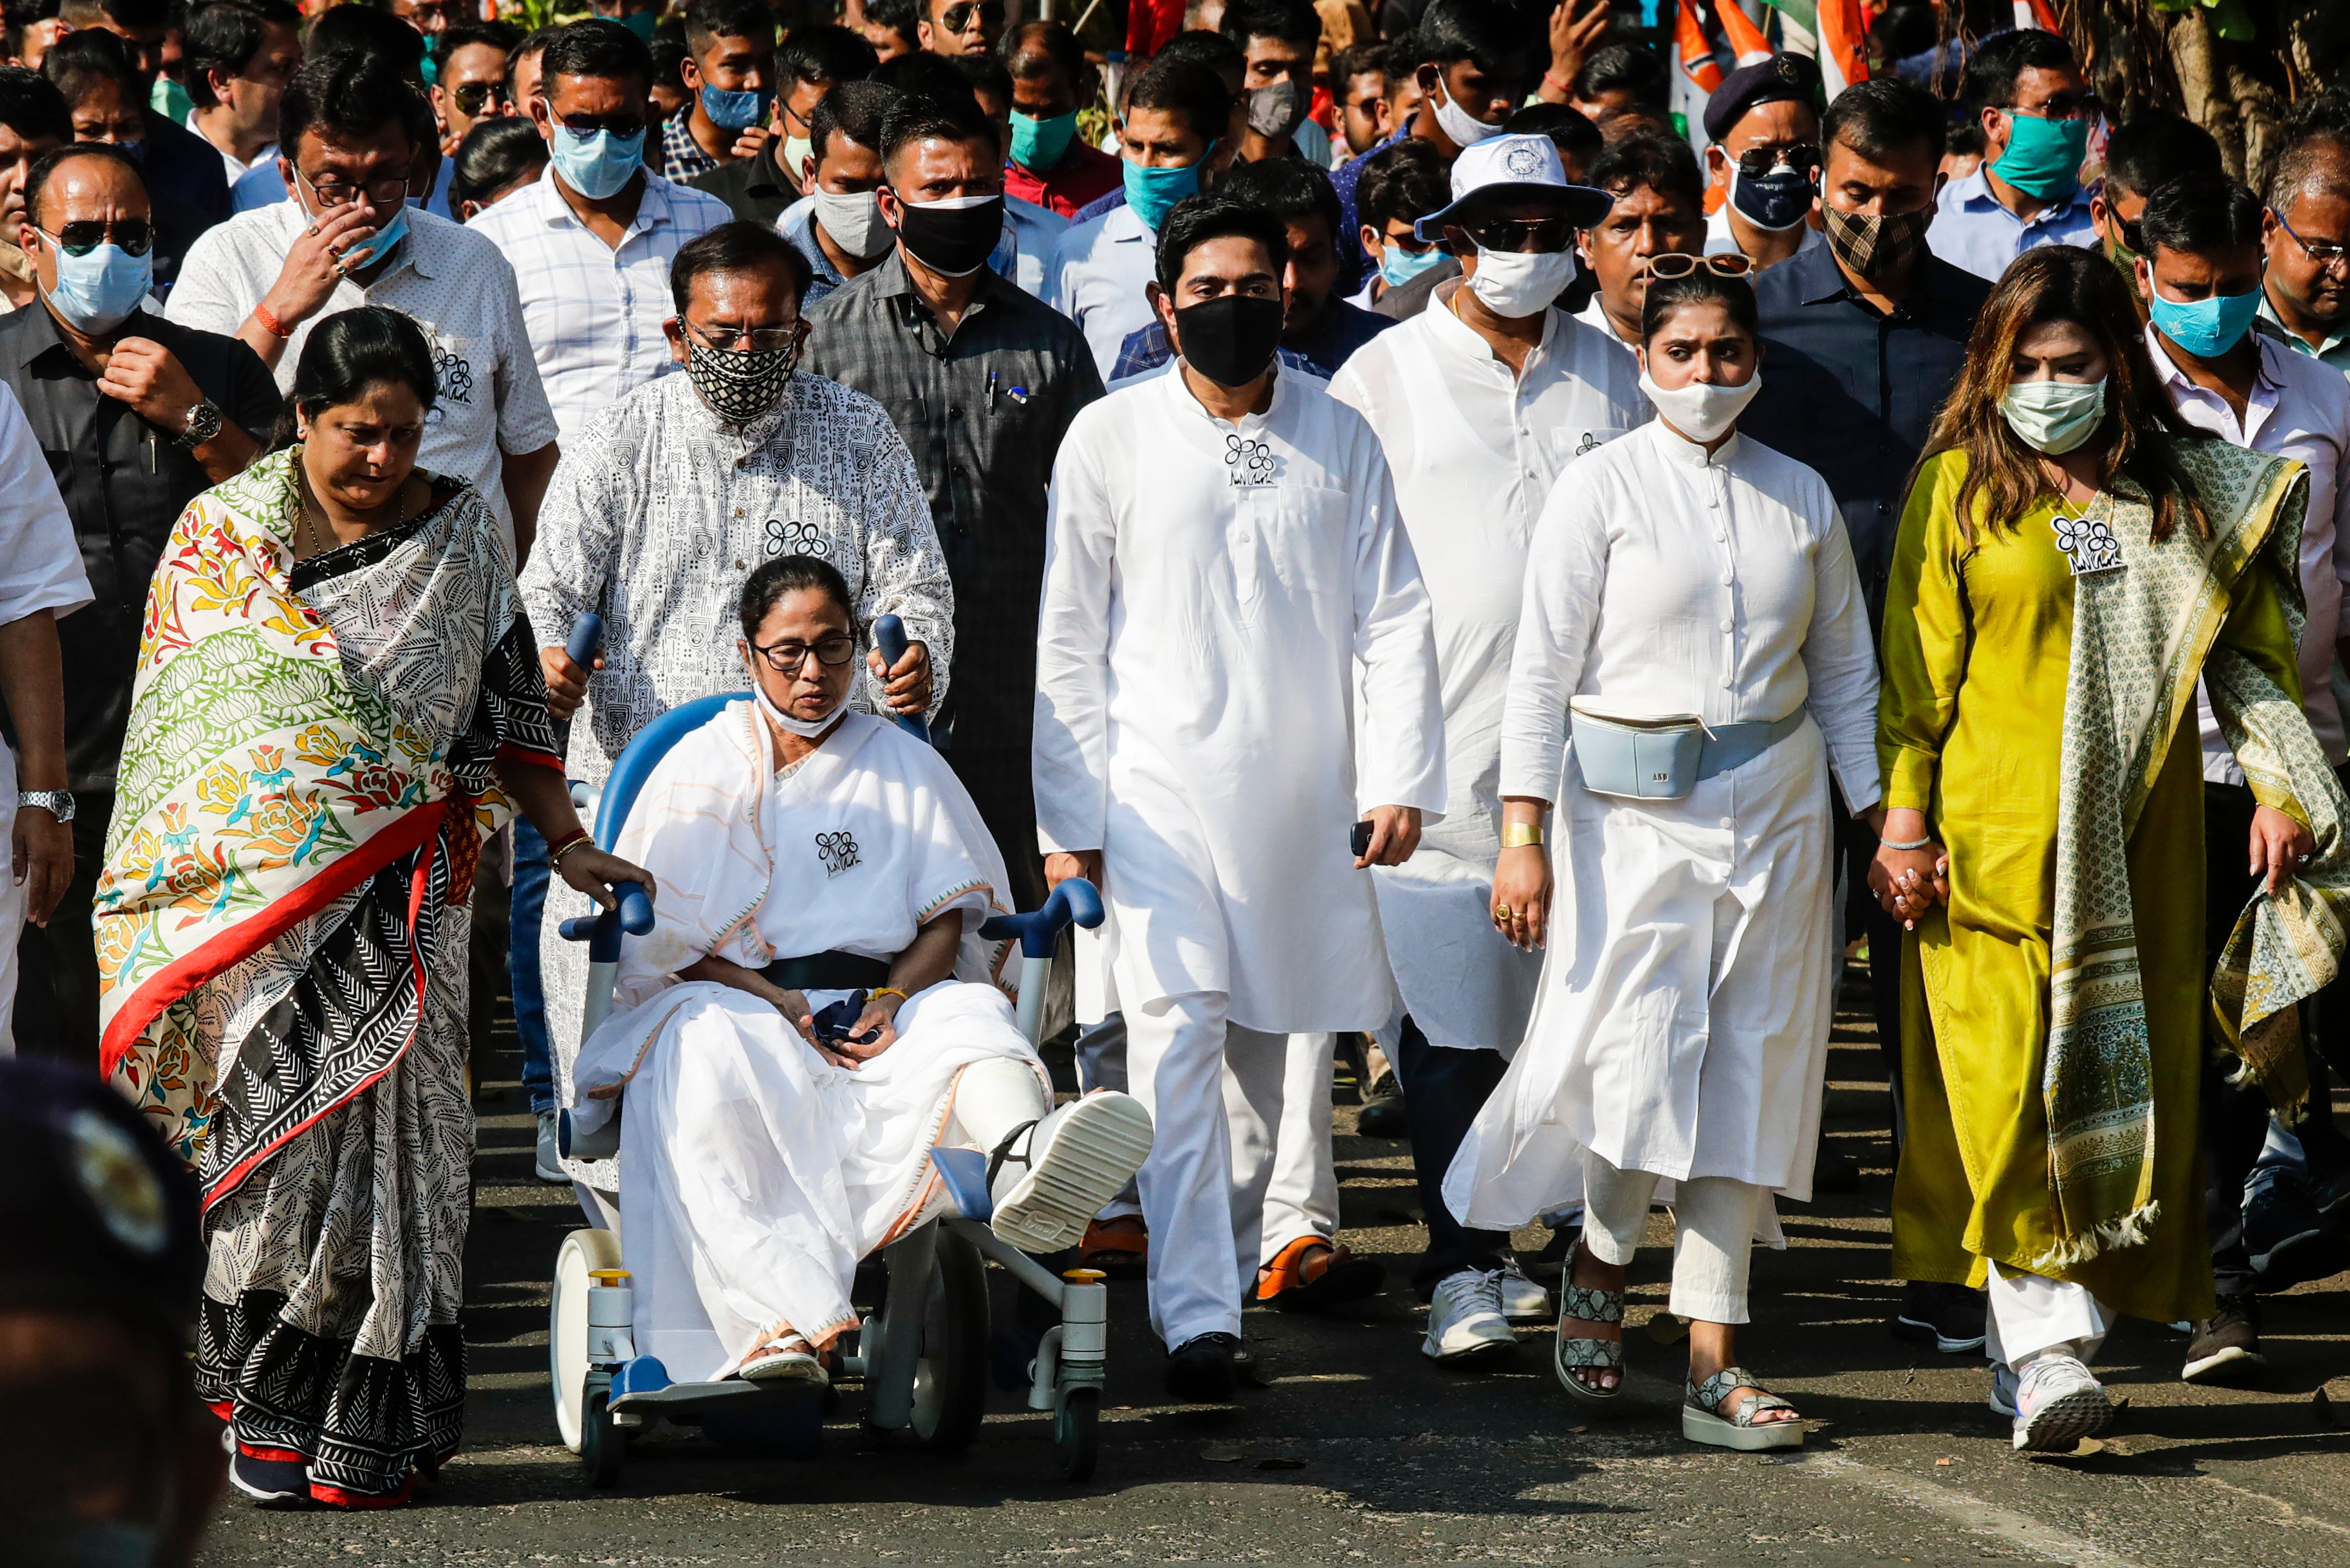 Chief minister of West Bengal Mamata Banerjee in a wheelchair along with other party leaders in a political rally in Kolkata a couple of days after an alleged attack on her